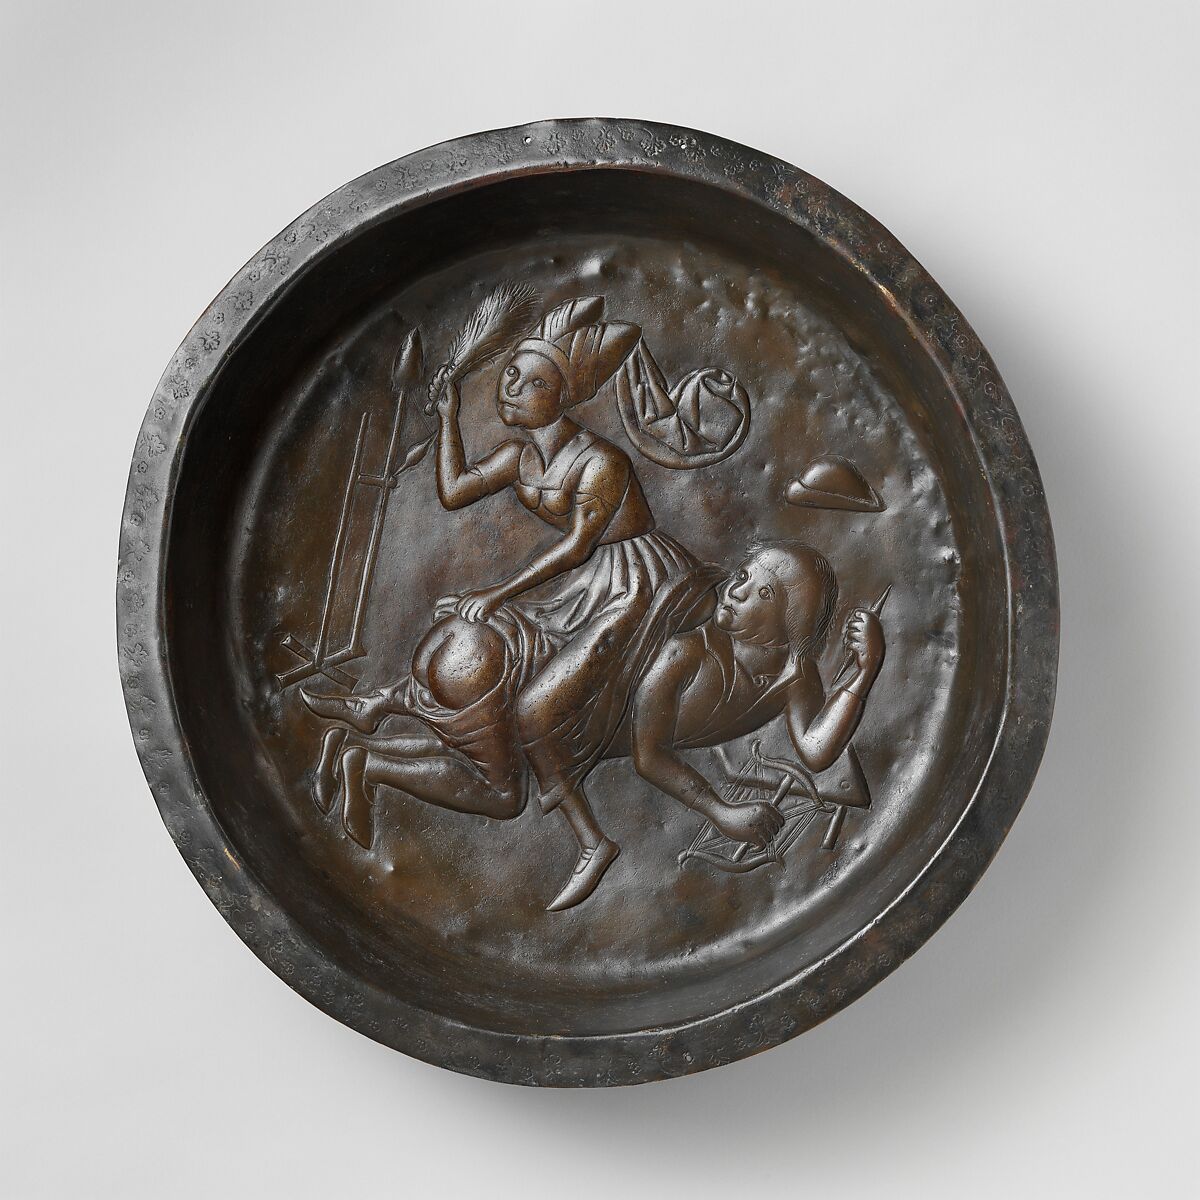 Plate with Wife Beating Husband, Copper alloy, wrought, Netherlandish